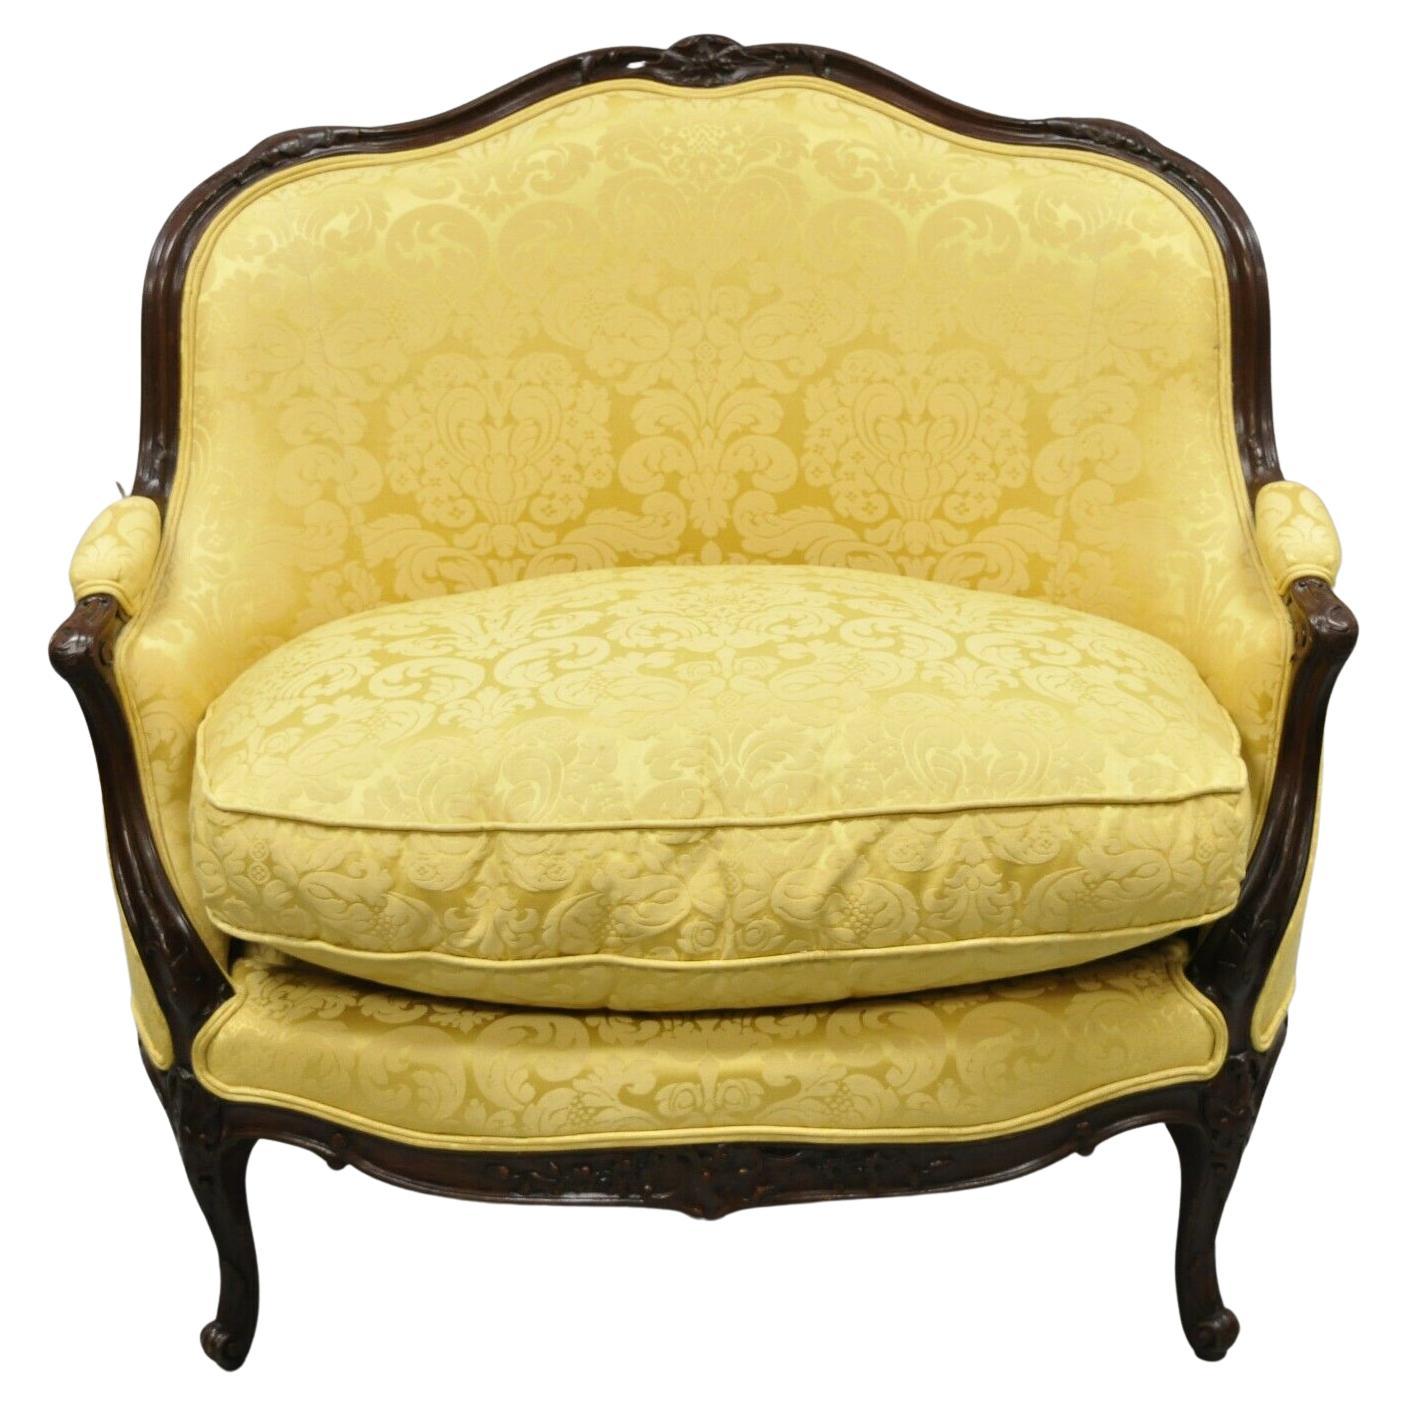 French Louis XV Style Gold Upholstered Wide Seat Lounge Chair Settee Bergere For Sale